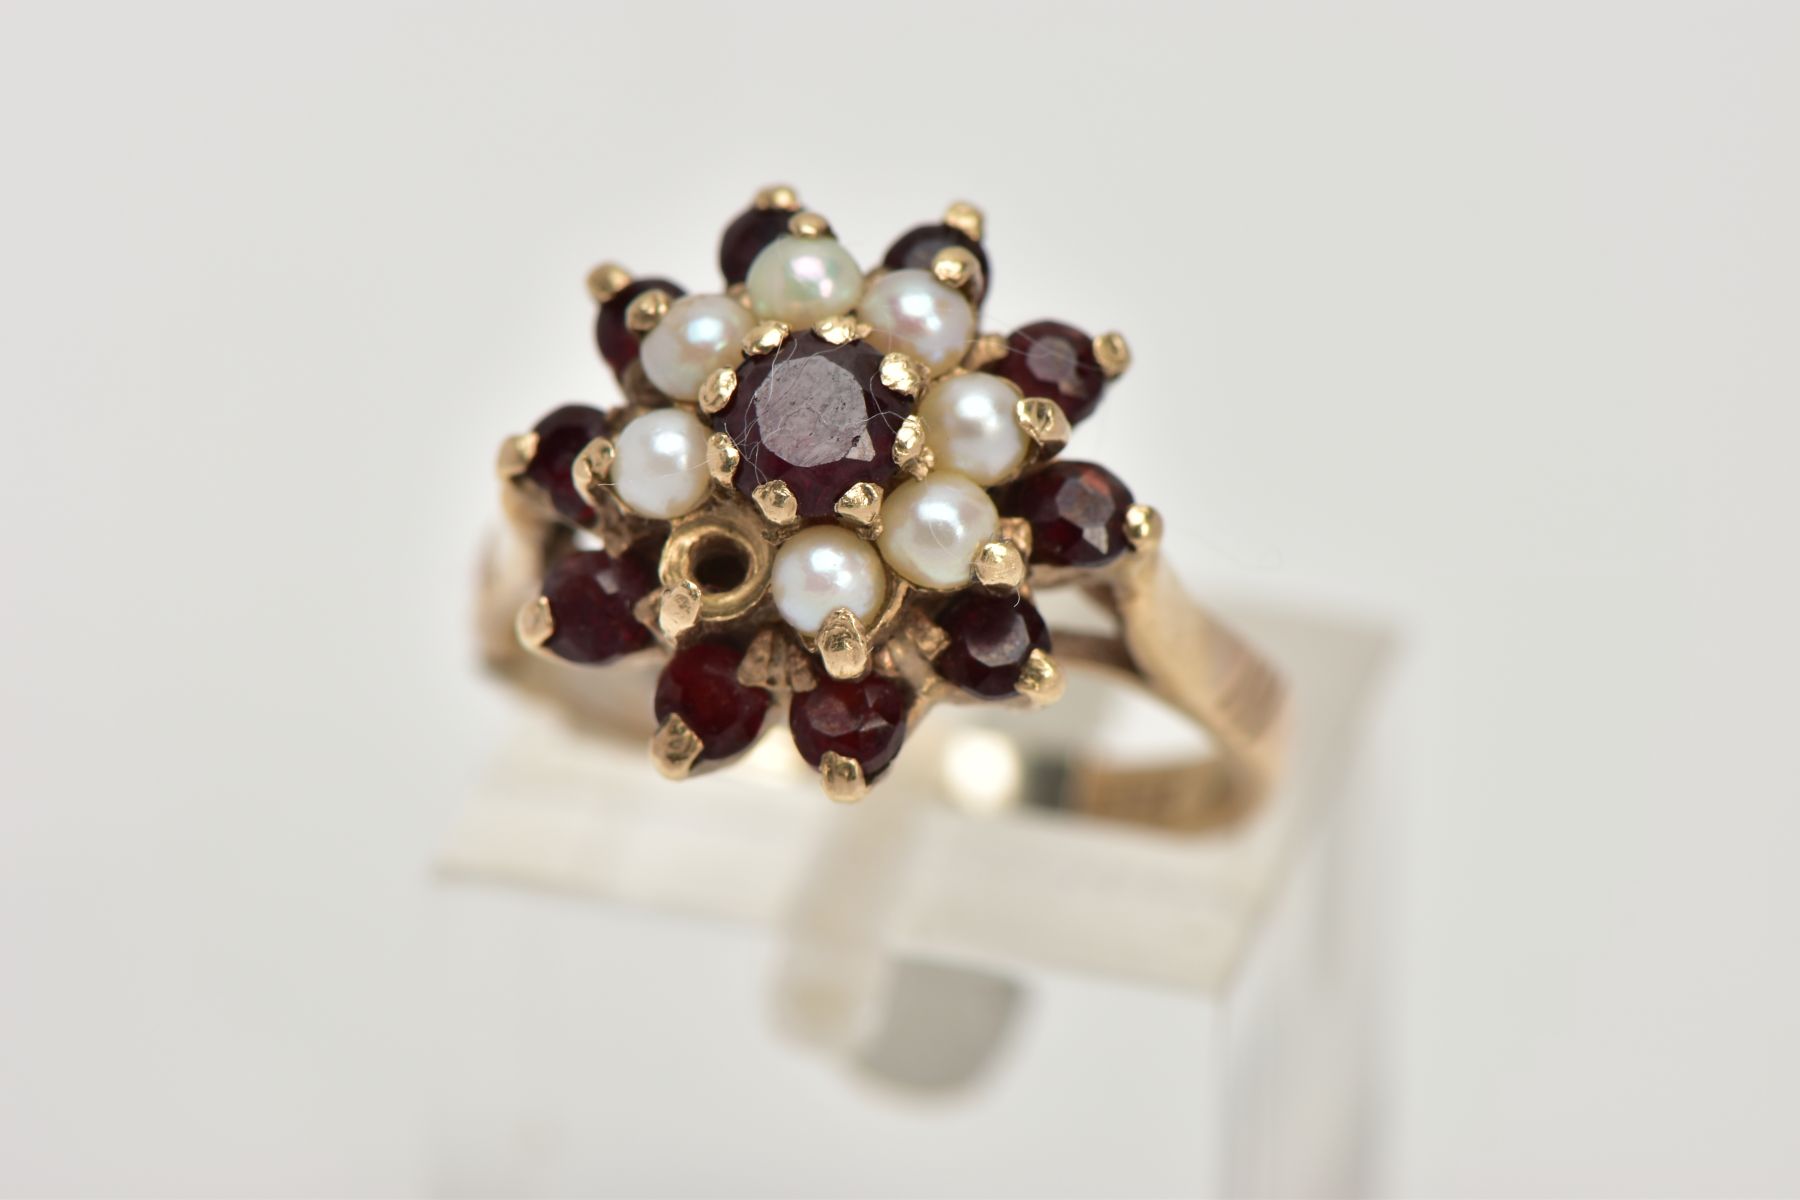 A GEM CLUSTER RING, designed as a tiered cluster of claw set red gems assessed as garnets and